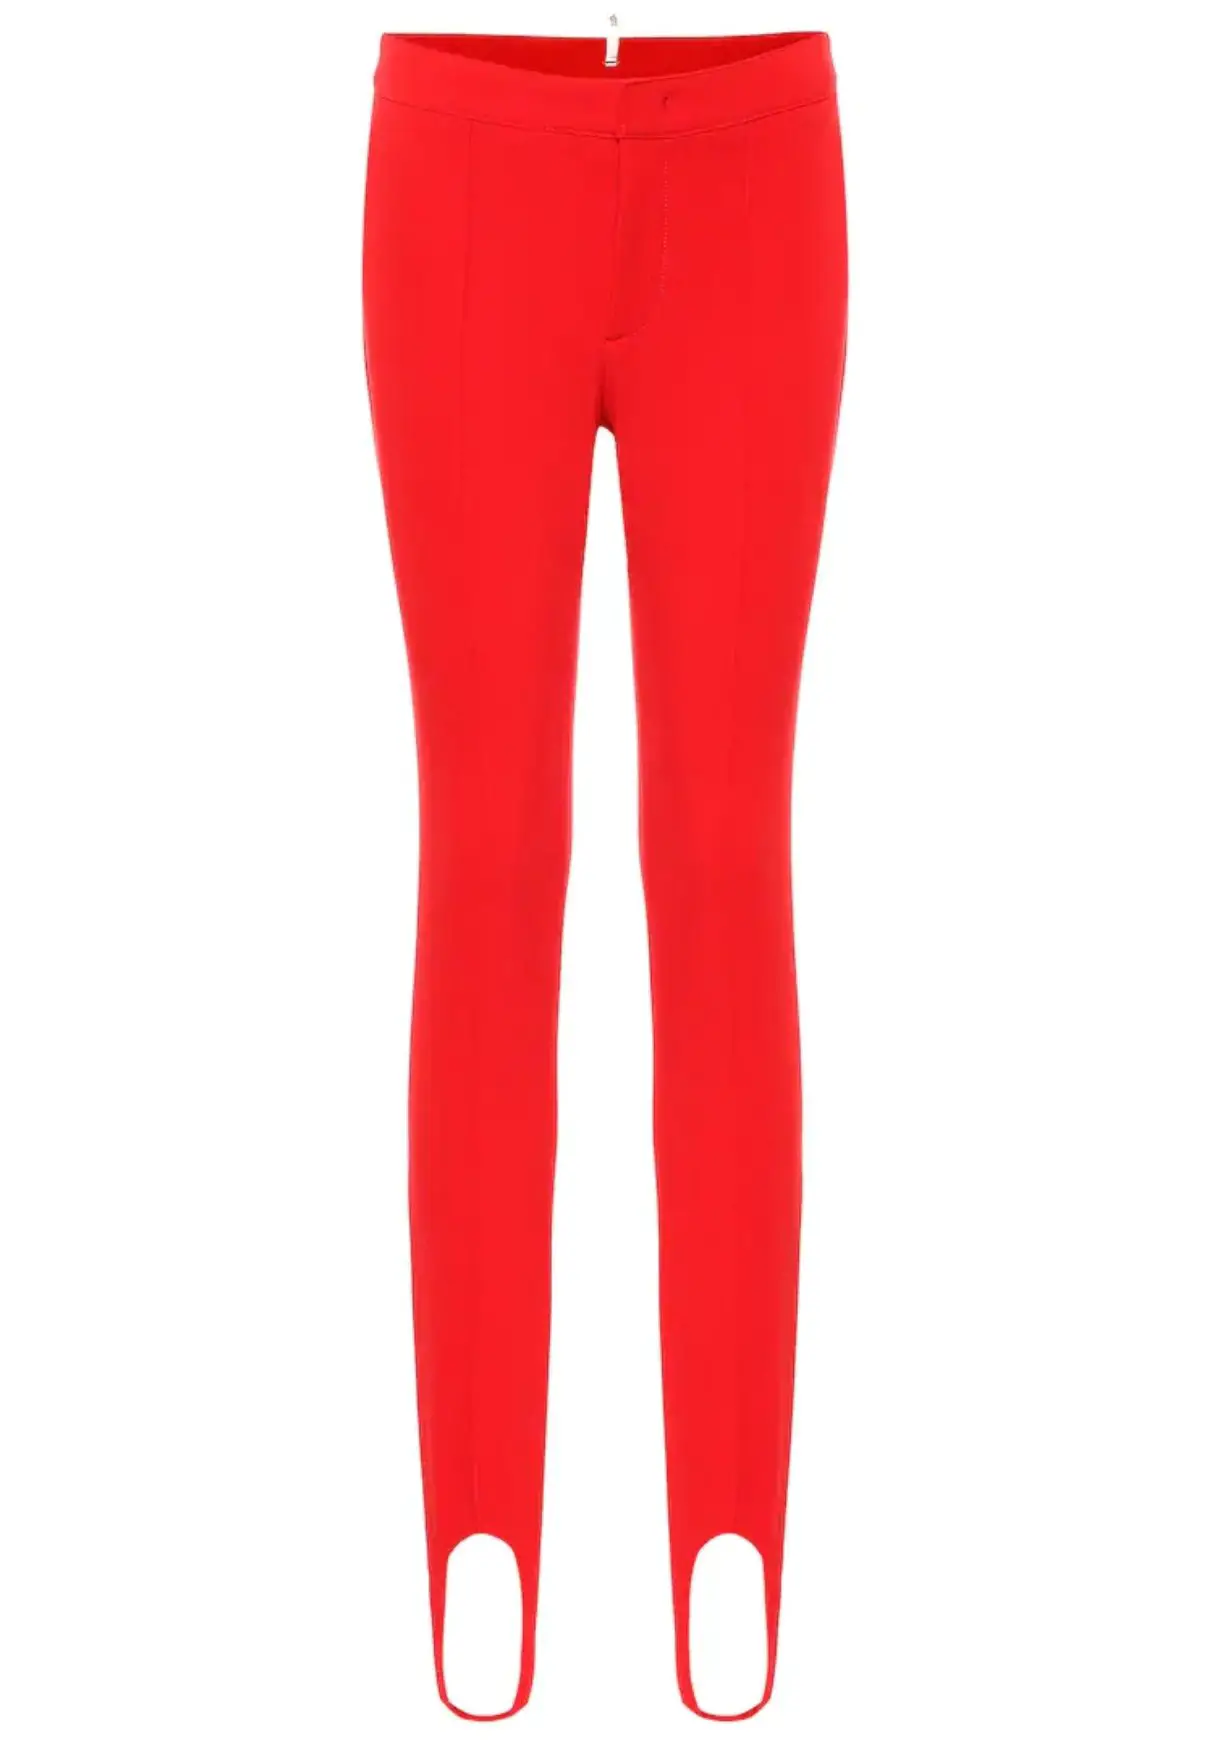 moncler grenoble red pants